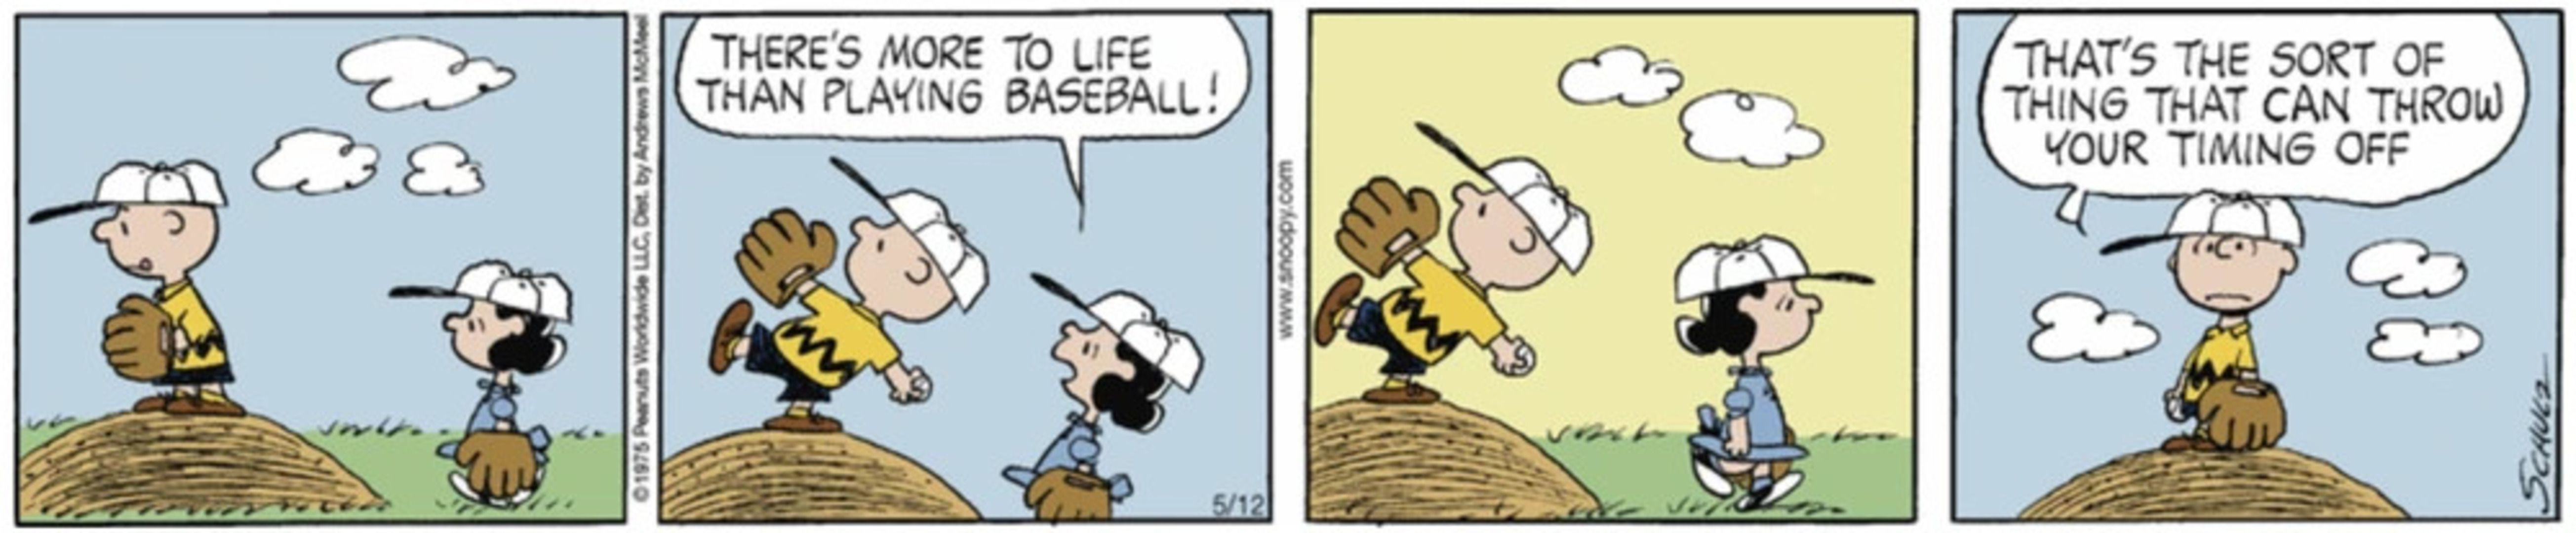 Lucy yelling at Charlie Brown while he's pitching on the baseball field, 